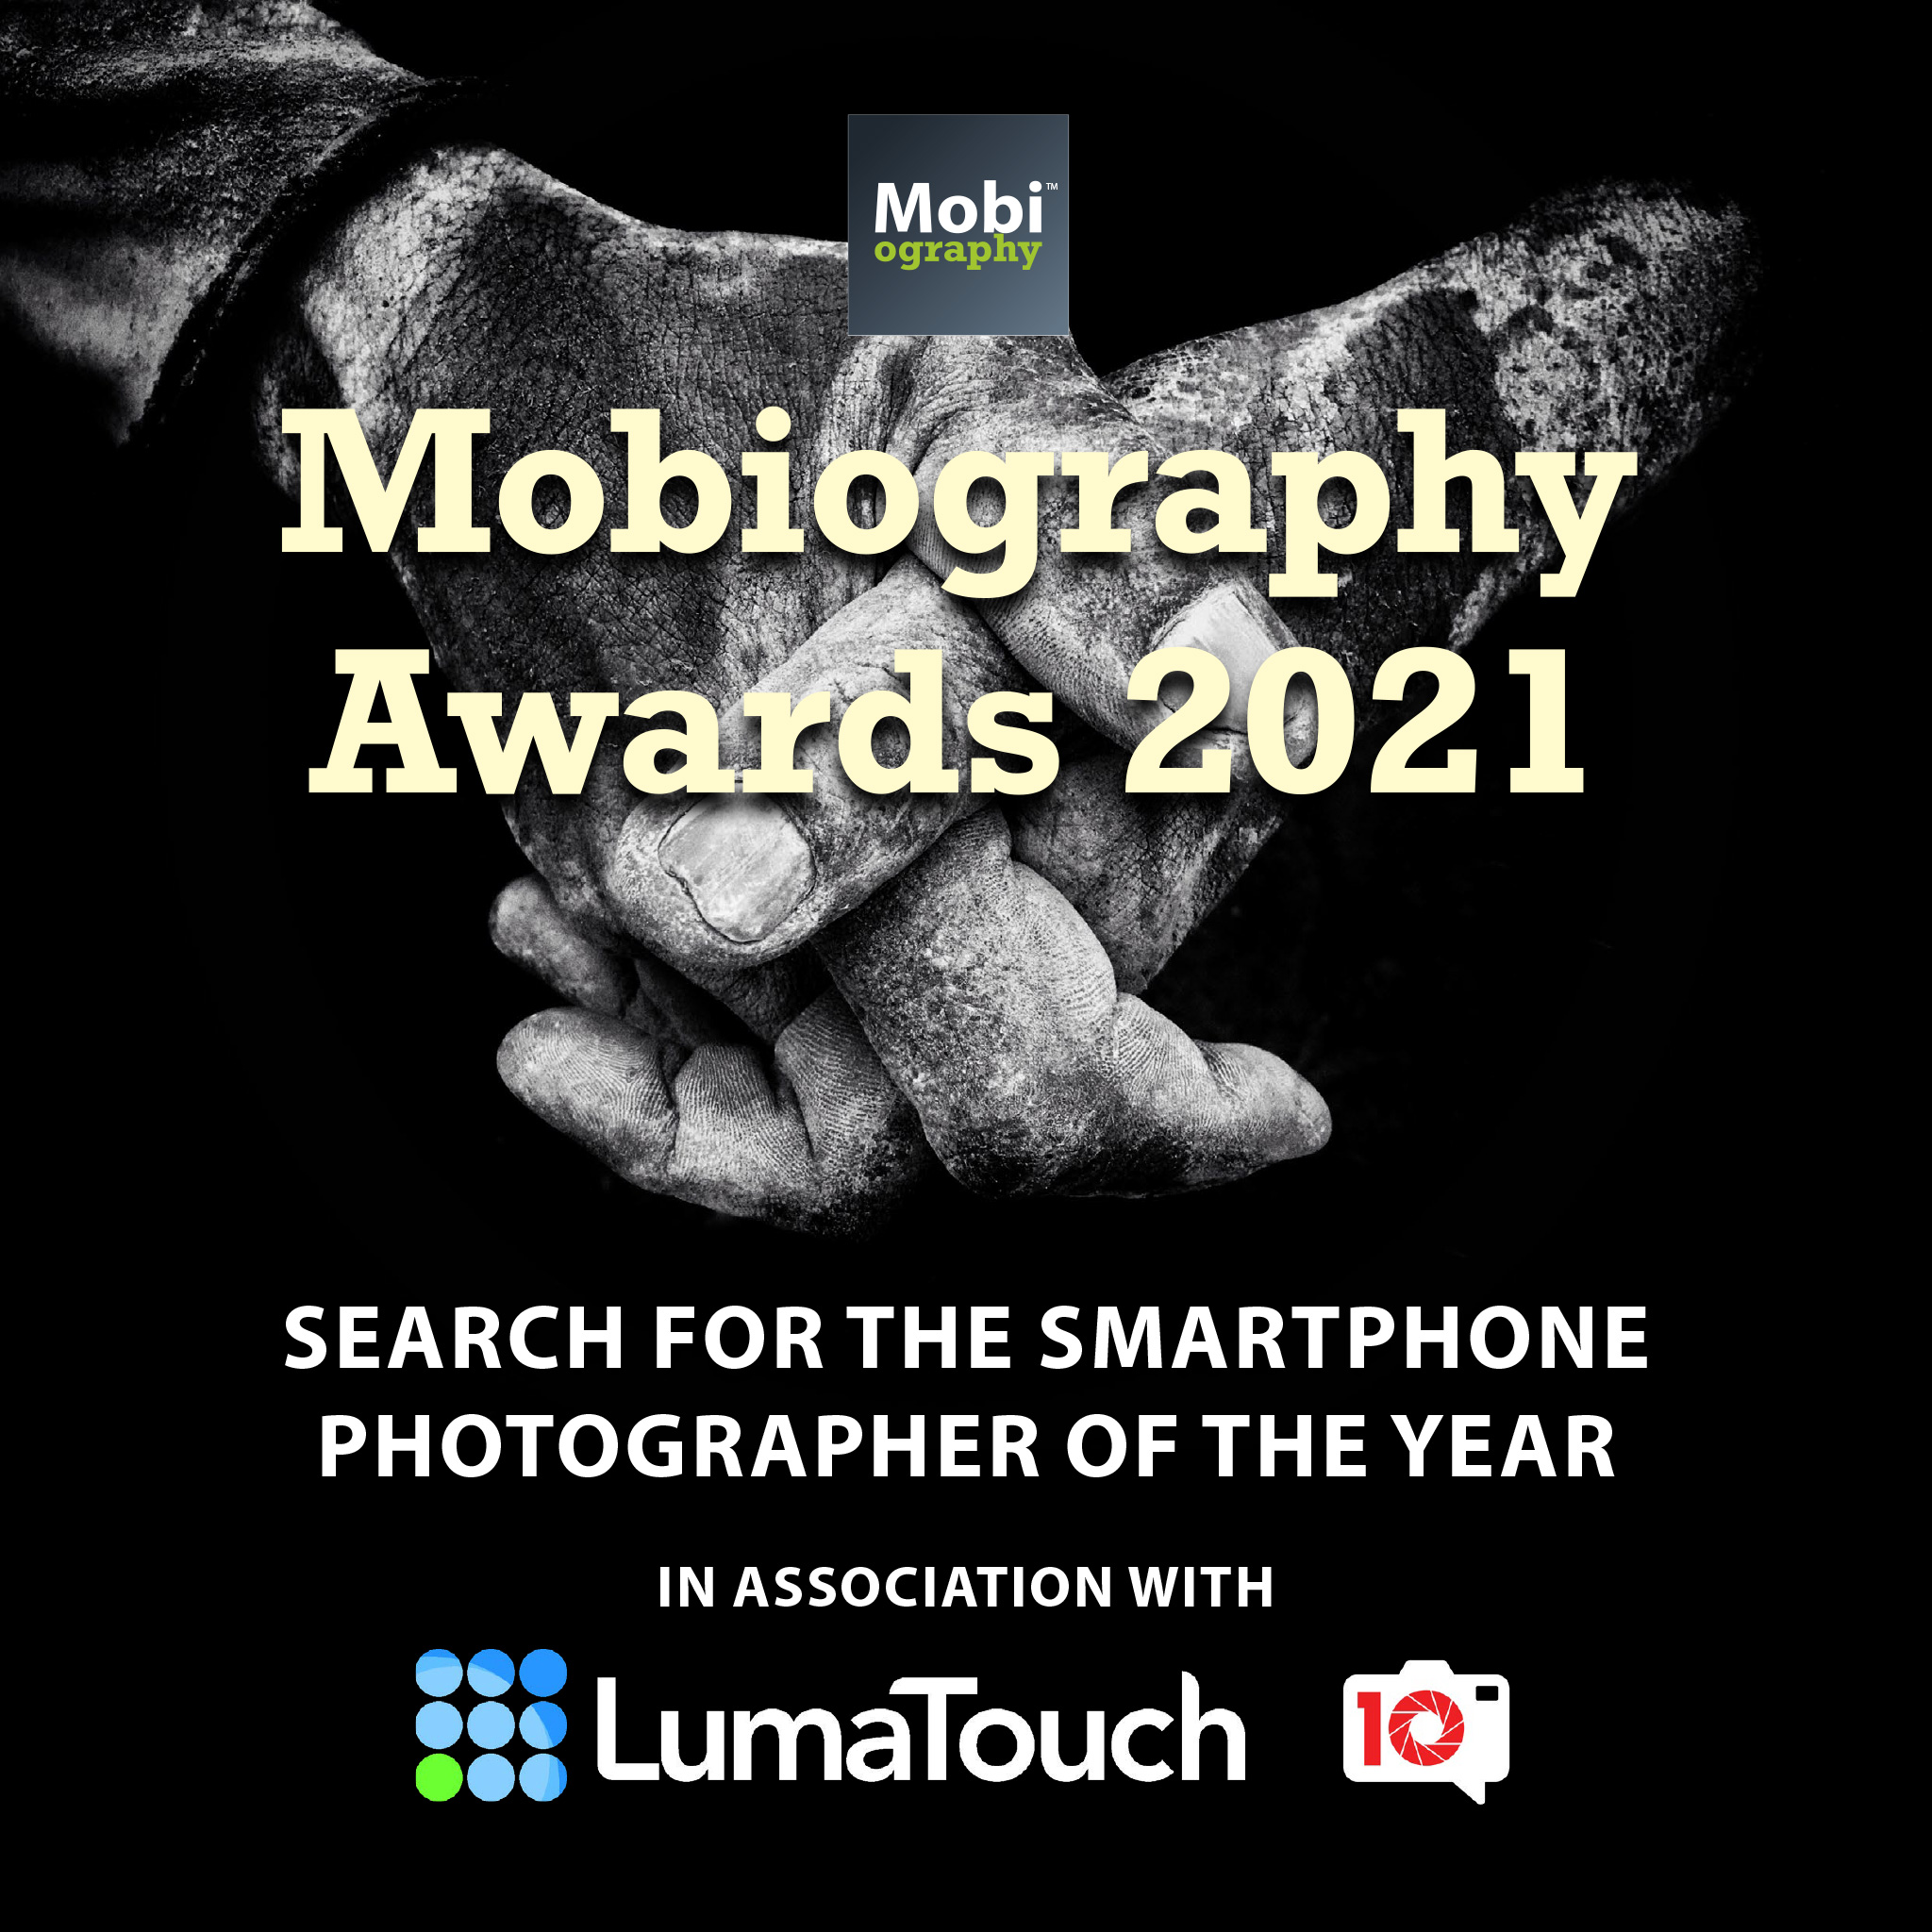 Street Photographers: Have You Heard of the Mobiography Awards?